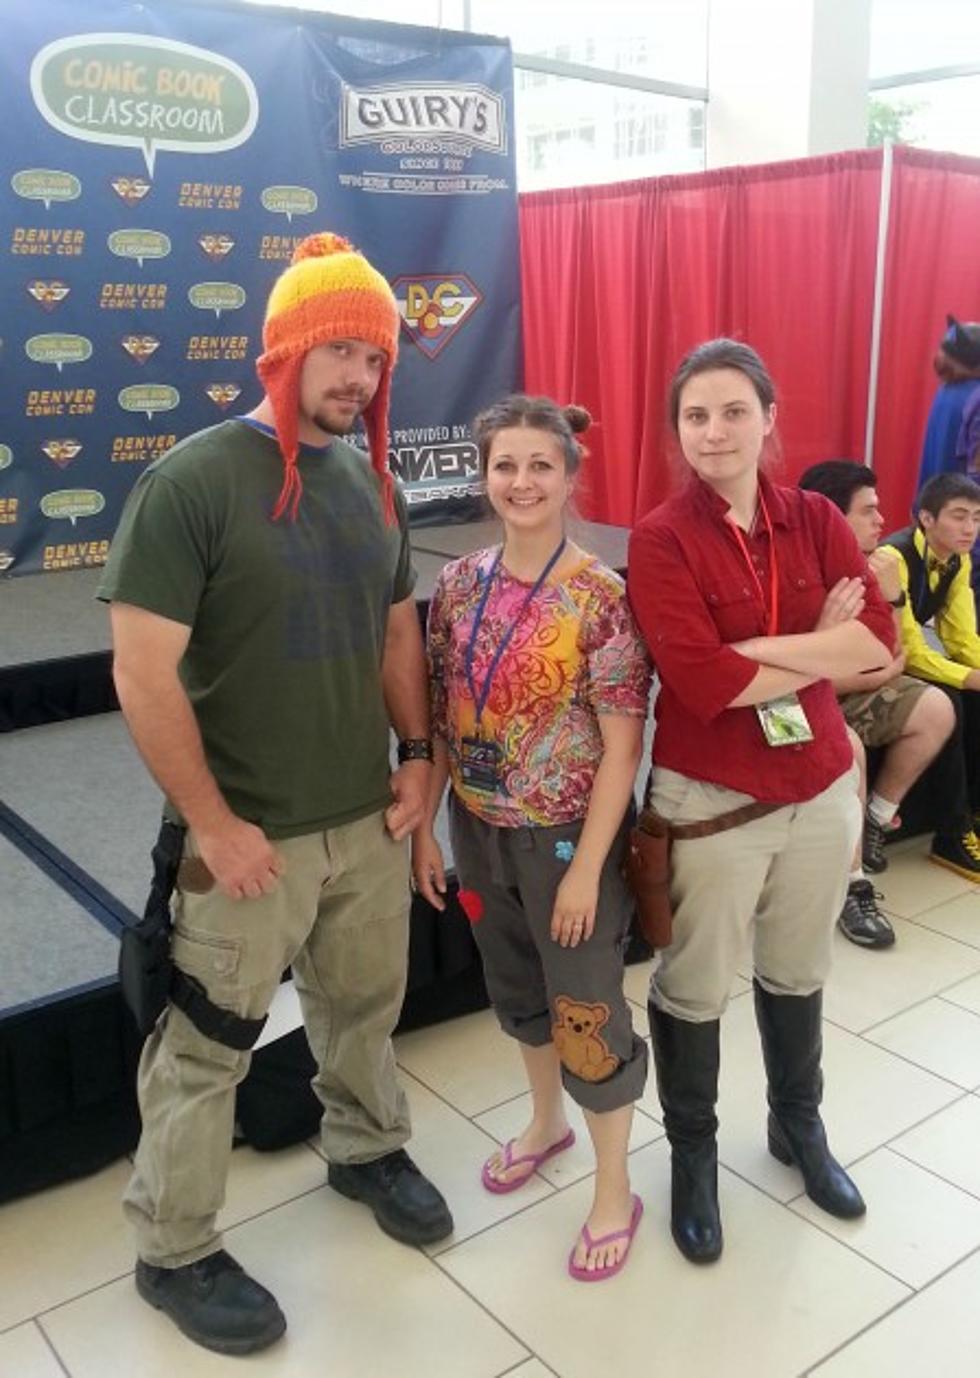 Firefly Cosplay Costumes &#8211; Denver Comic Con 2013